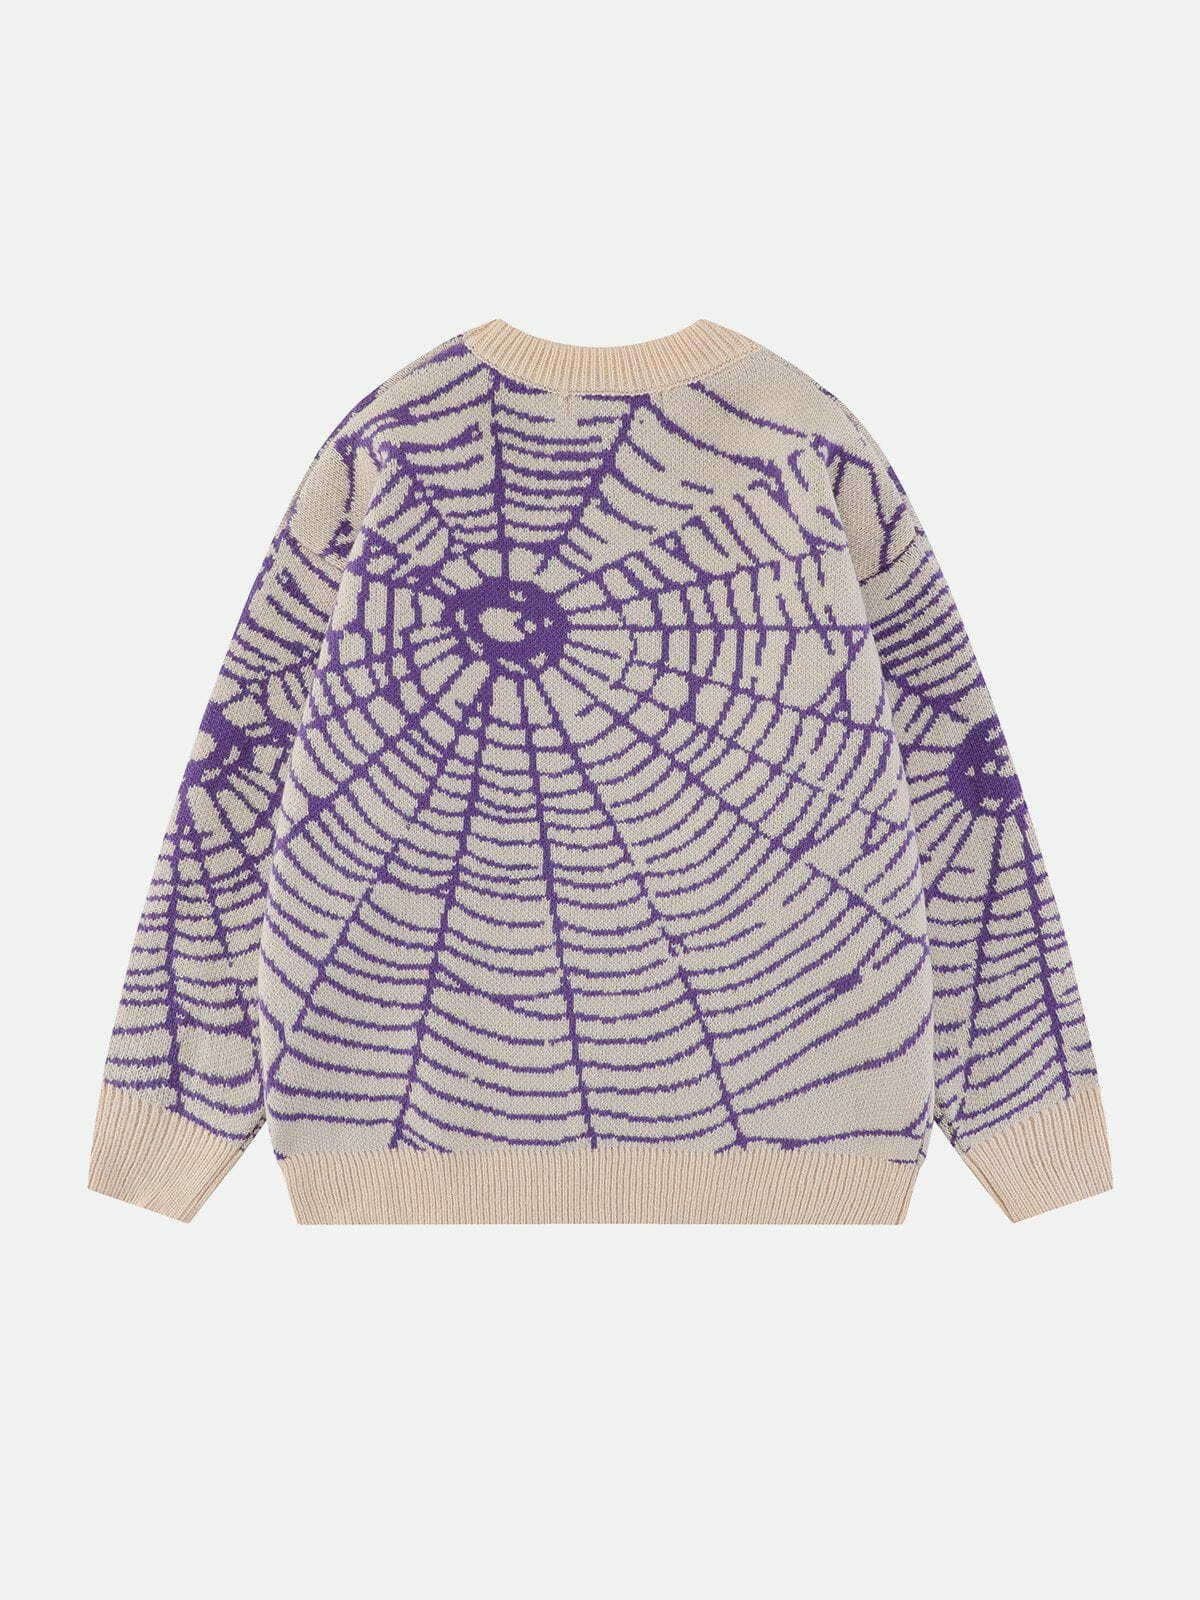 knit spider web sweater edgy streetwear chic 6691